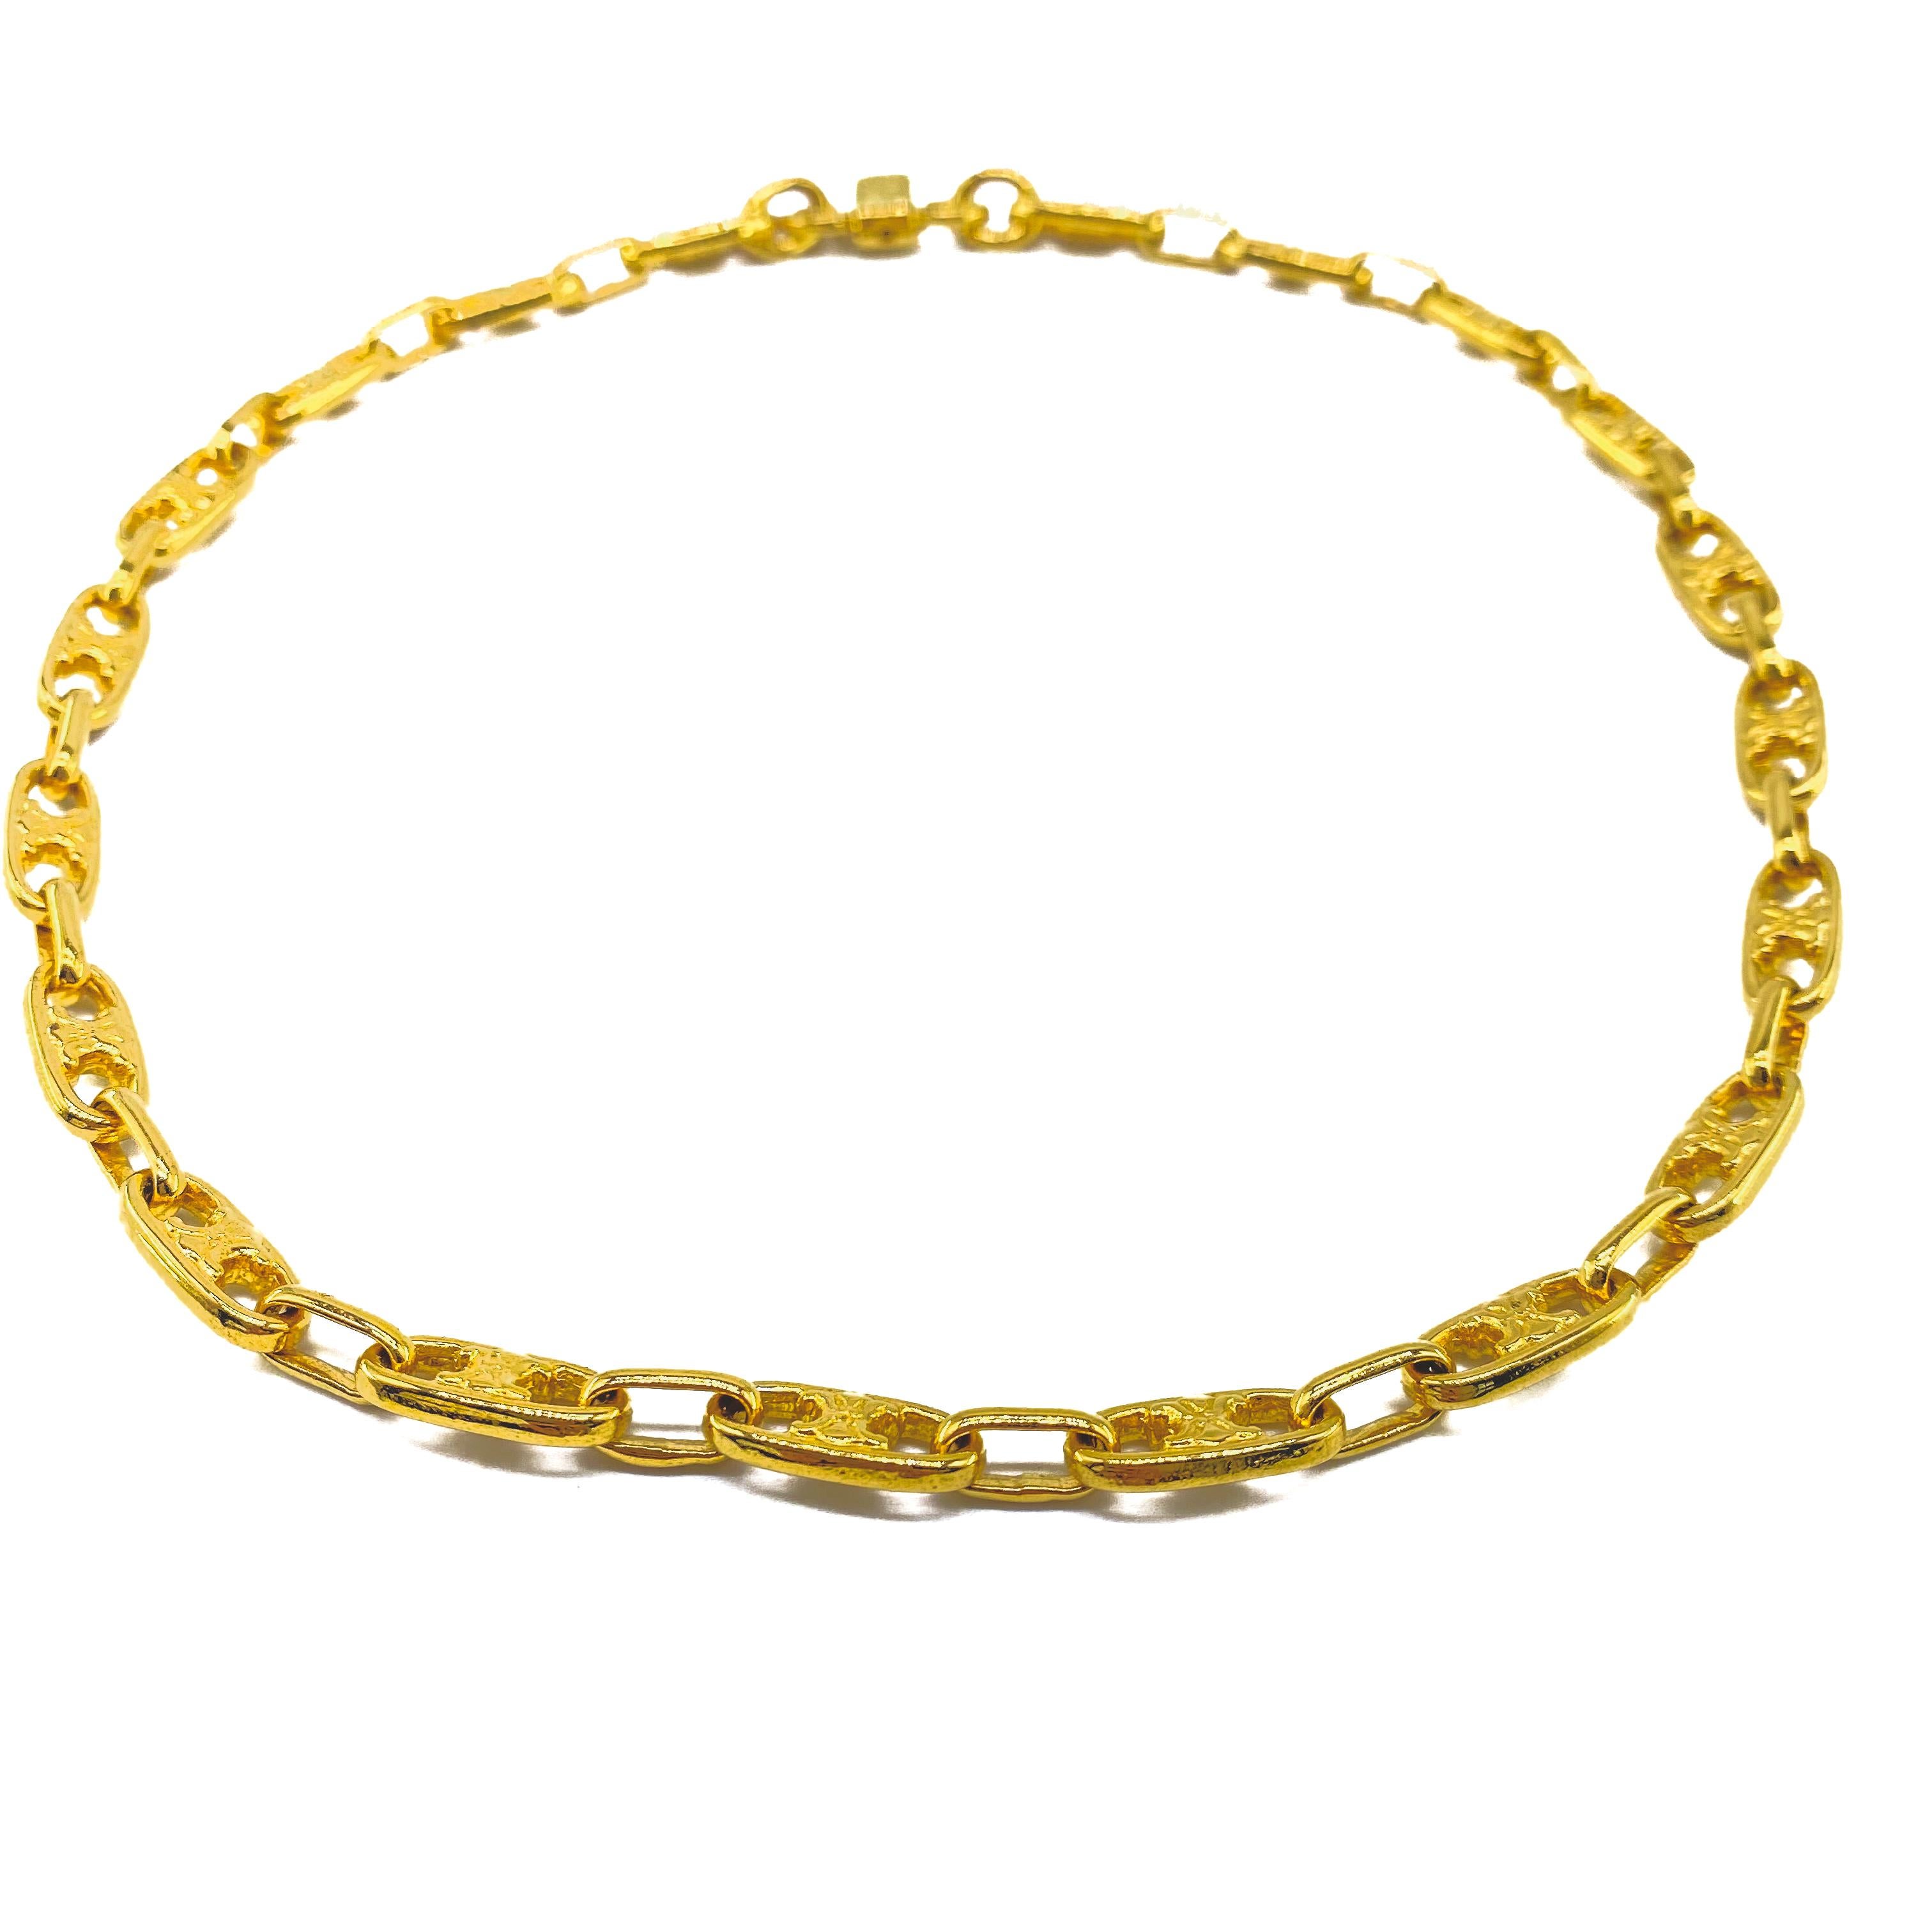 Celine Vintage 1970s Choker Necklace

Amazing little choker from the Celine 70s archive

Detail
-Made in Italy in the 1970s
-Crafted from high quality gold plated metal
-Each link features the iconic Celine Macadam logo 

Size & Fit
-Length approx